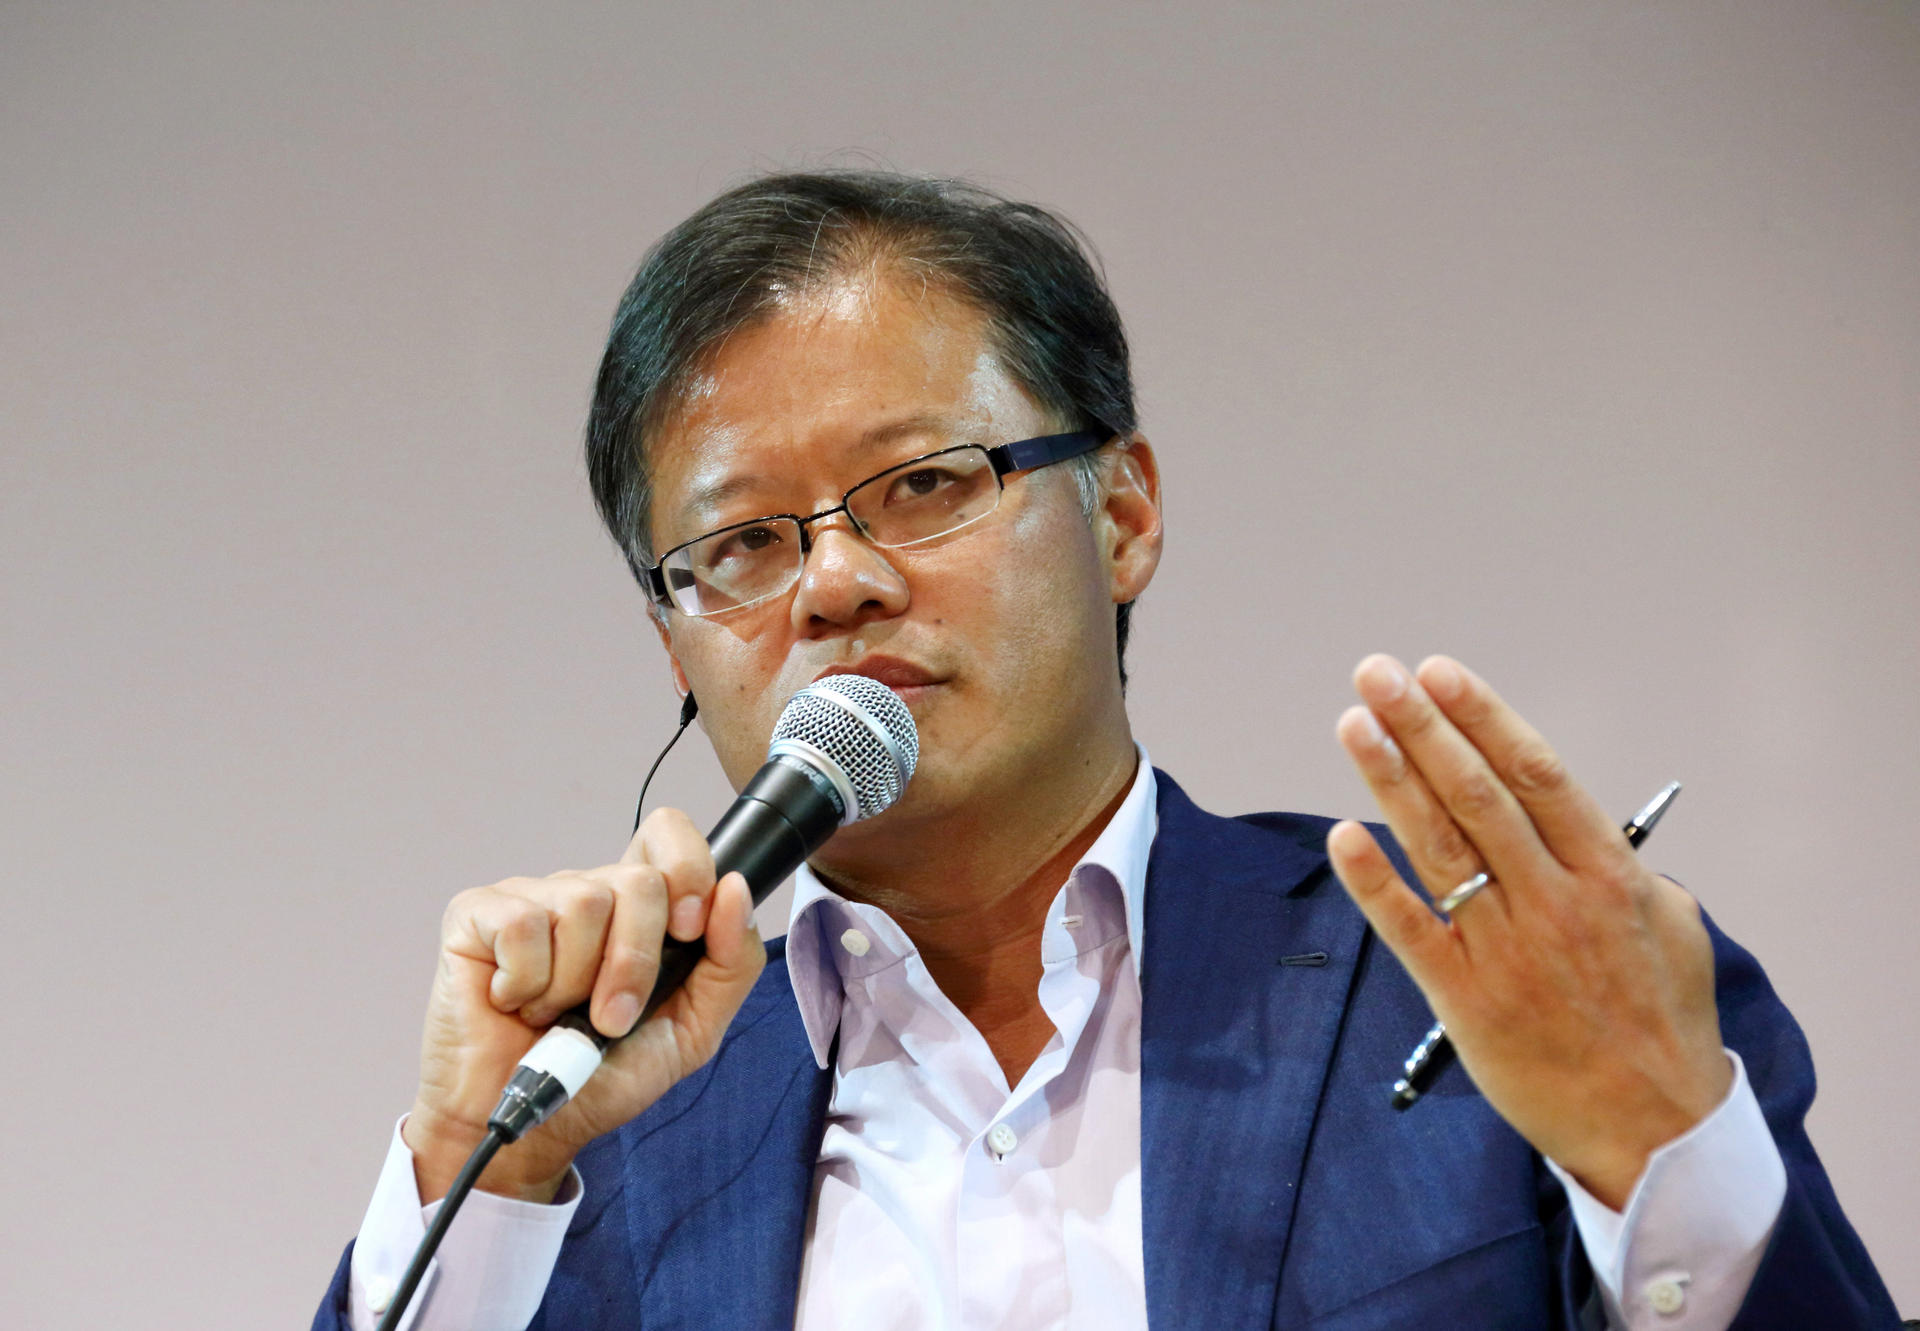 Yahoo founder Jerry Yang is one of the most influential figures in Silicon Valley and his connections have been a boost to mainland e-commerce firm Alibaba. Photo: Bloomberg